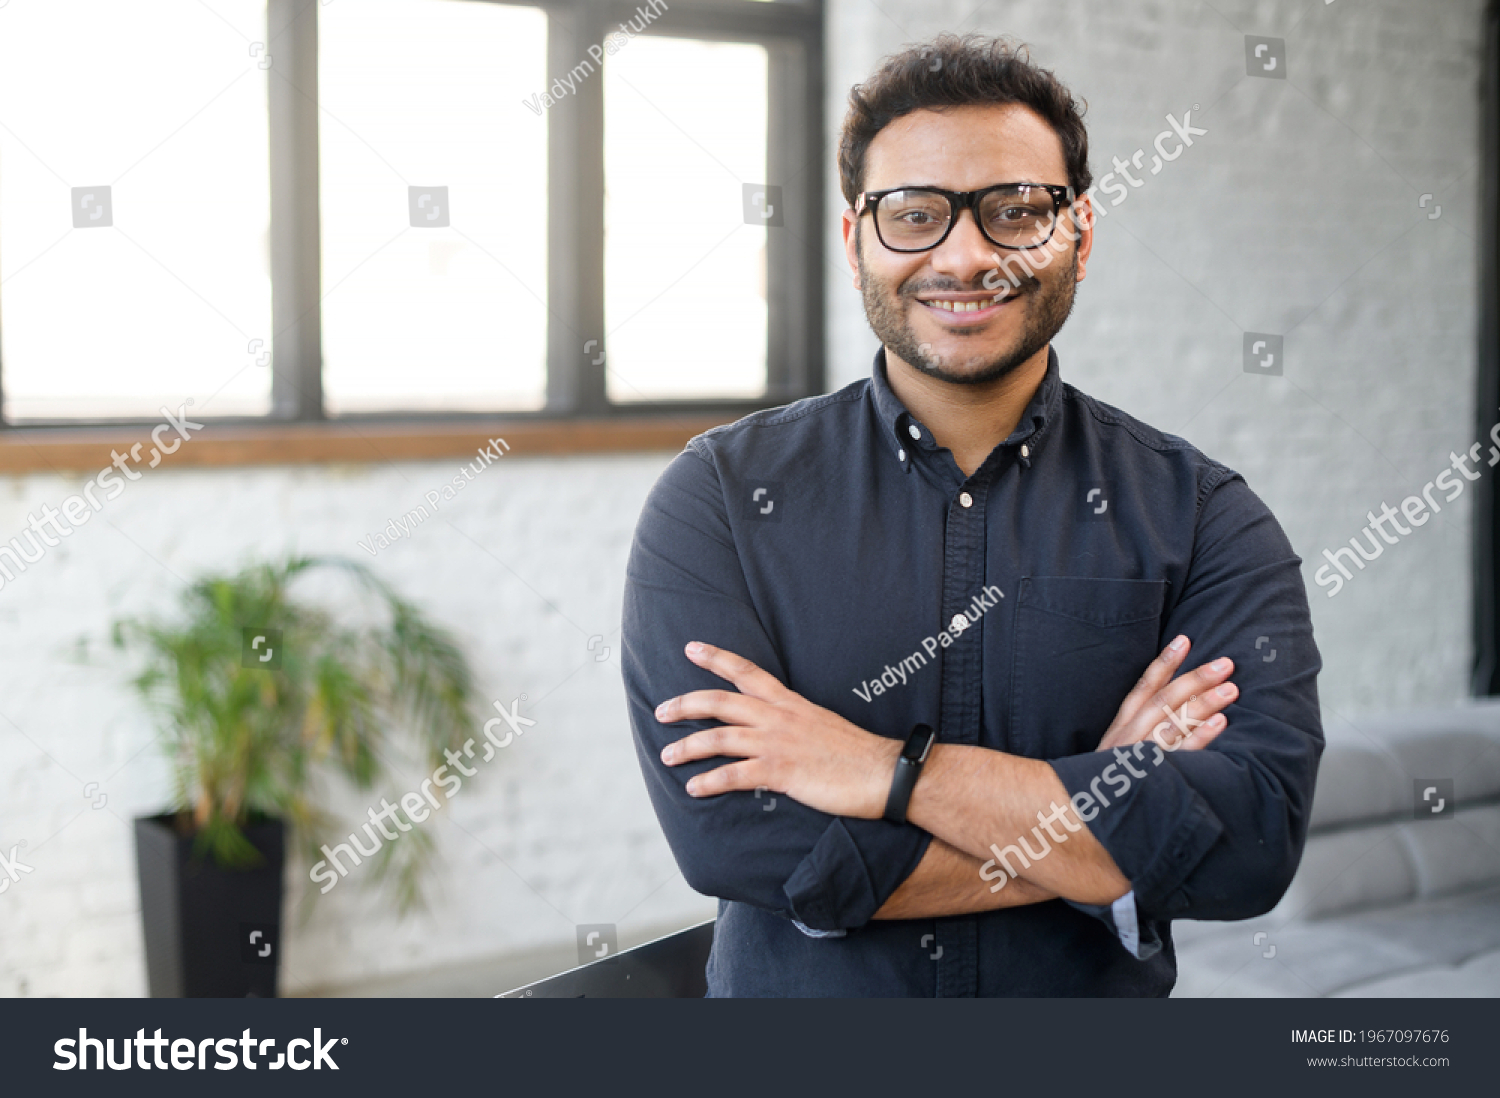 Headshot of skilled hindu male employee standing with arms crossed in modern office, successful confident mixed-race man wearing eyeglasses and smart casual, business portrait of indian entrepreneur #1967097676